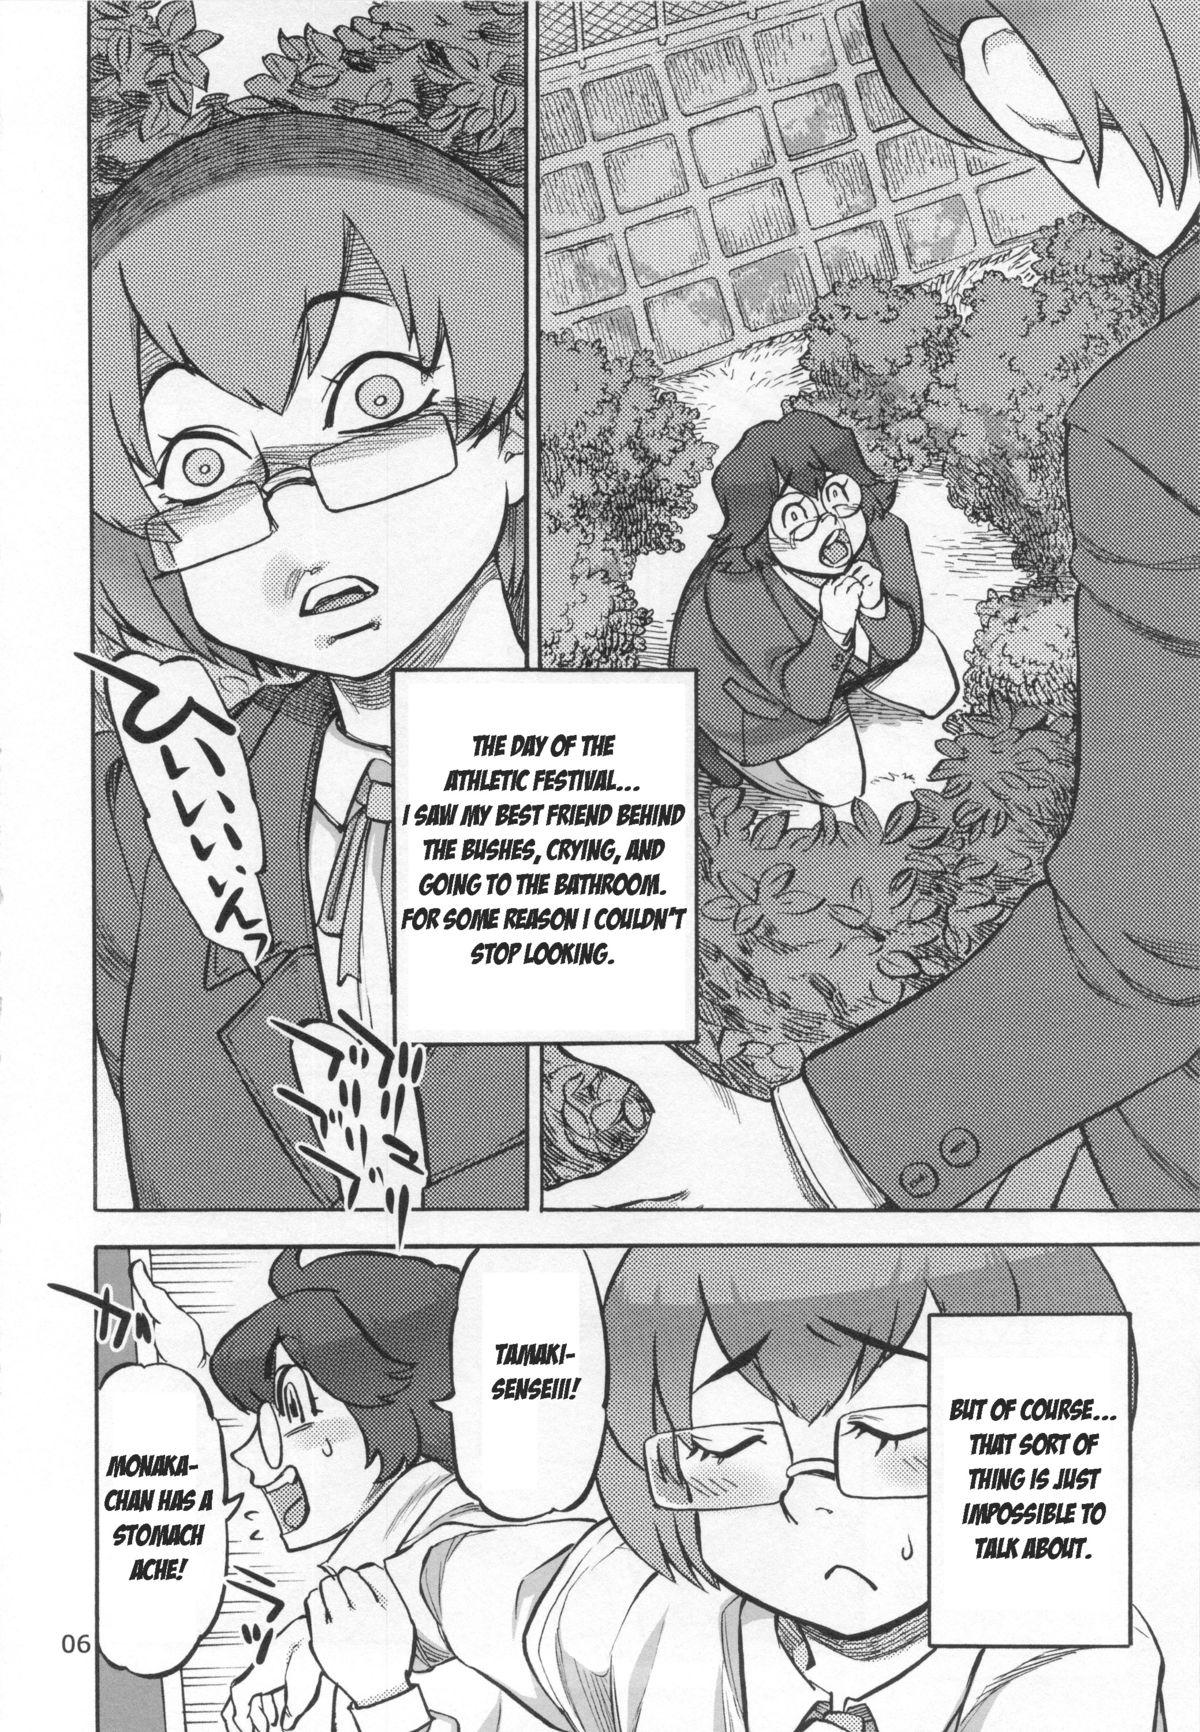 Spreadeagle Junko's Extracurricular Excretion Activities HD - Page 7